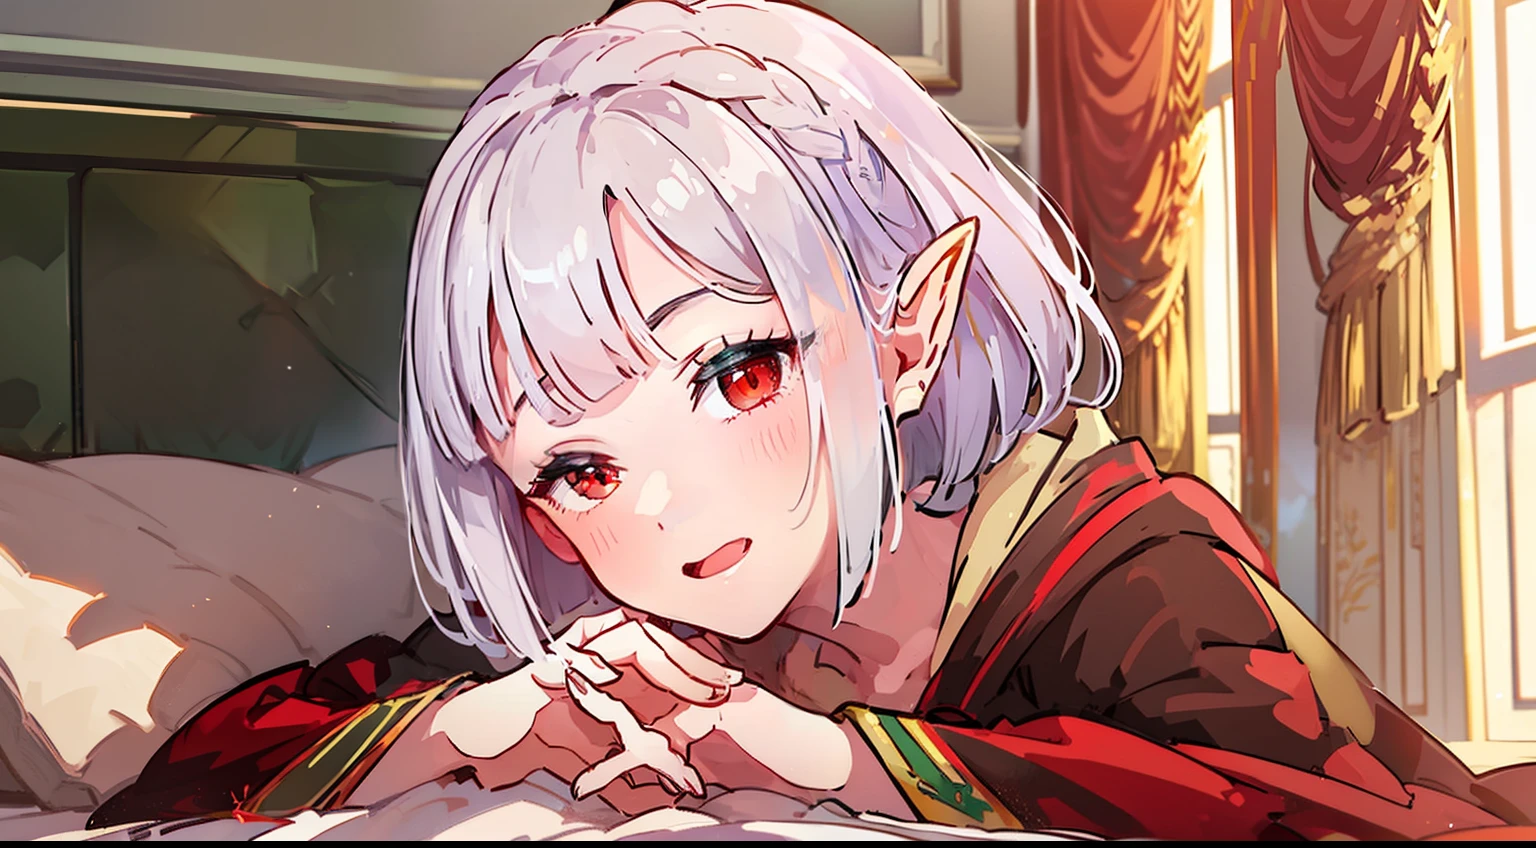 ((Put your hands on your face)), (surprised)), (Red face), 1 girl closeup, Elf, Silver hair, Red eyes, Braid hair, Bob cut, Wizard, Robe, Ruffles, Tights, Cloak, Indoors, Bed, Sleeping, TS, Concept art, Beautiful anime scene, Beautiful anime scenery, Best quality, Masterpiece, 4K